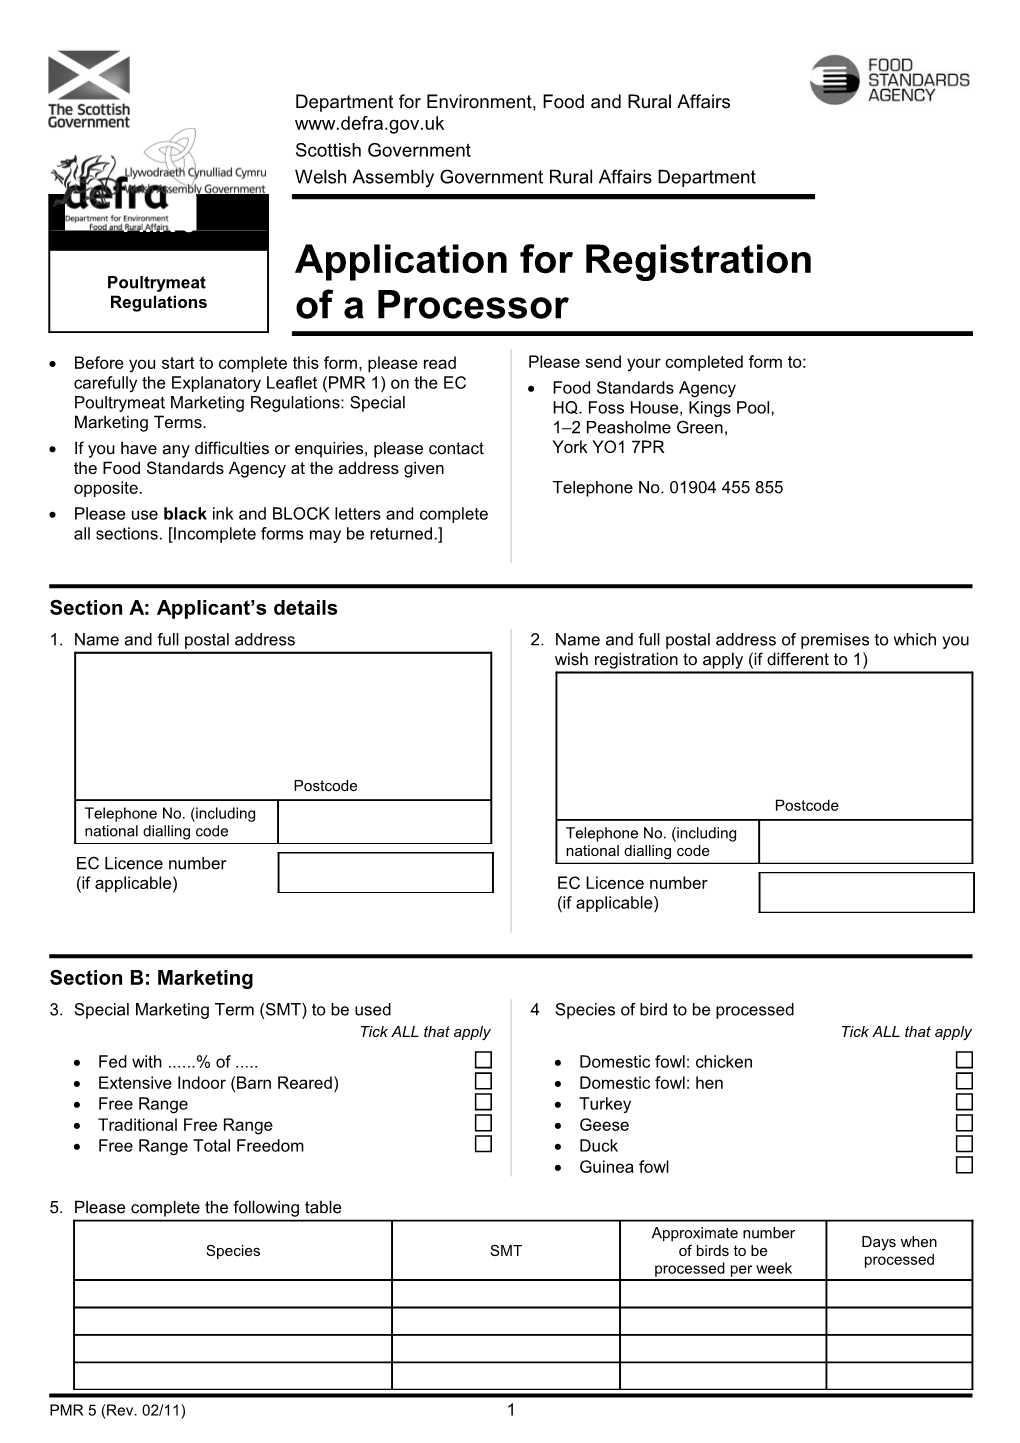 Please Send Your Completed Form To